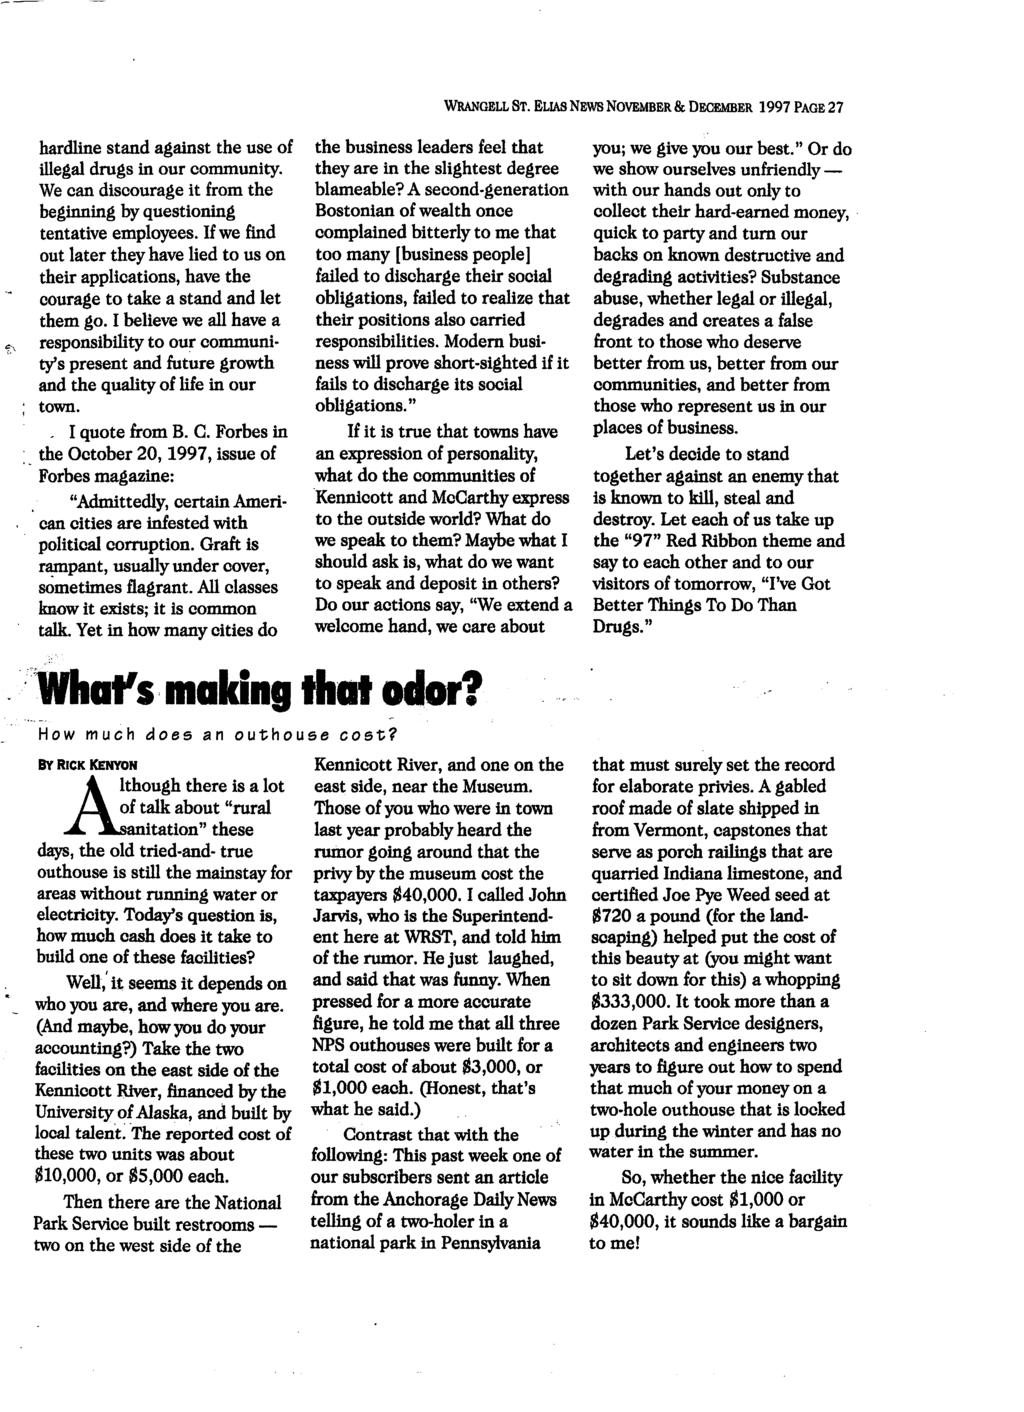 WRANGELL ST. ELIAS NEWS NOVEMBER & DECEMBER 1997 PAGE 27 hardline stand against the use of illegal drugs in our community. We can discourage it from the beginning by questioning tentative employees.